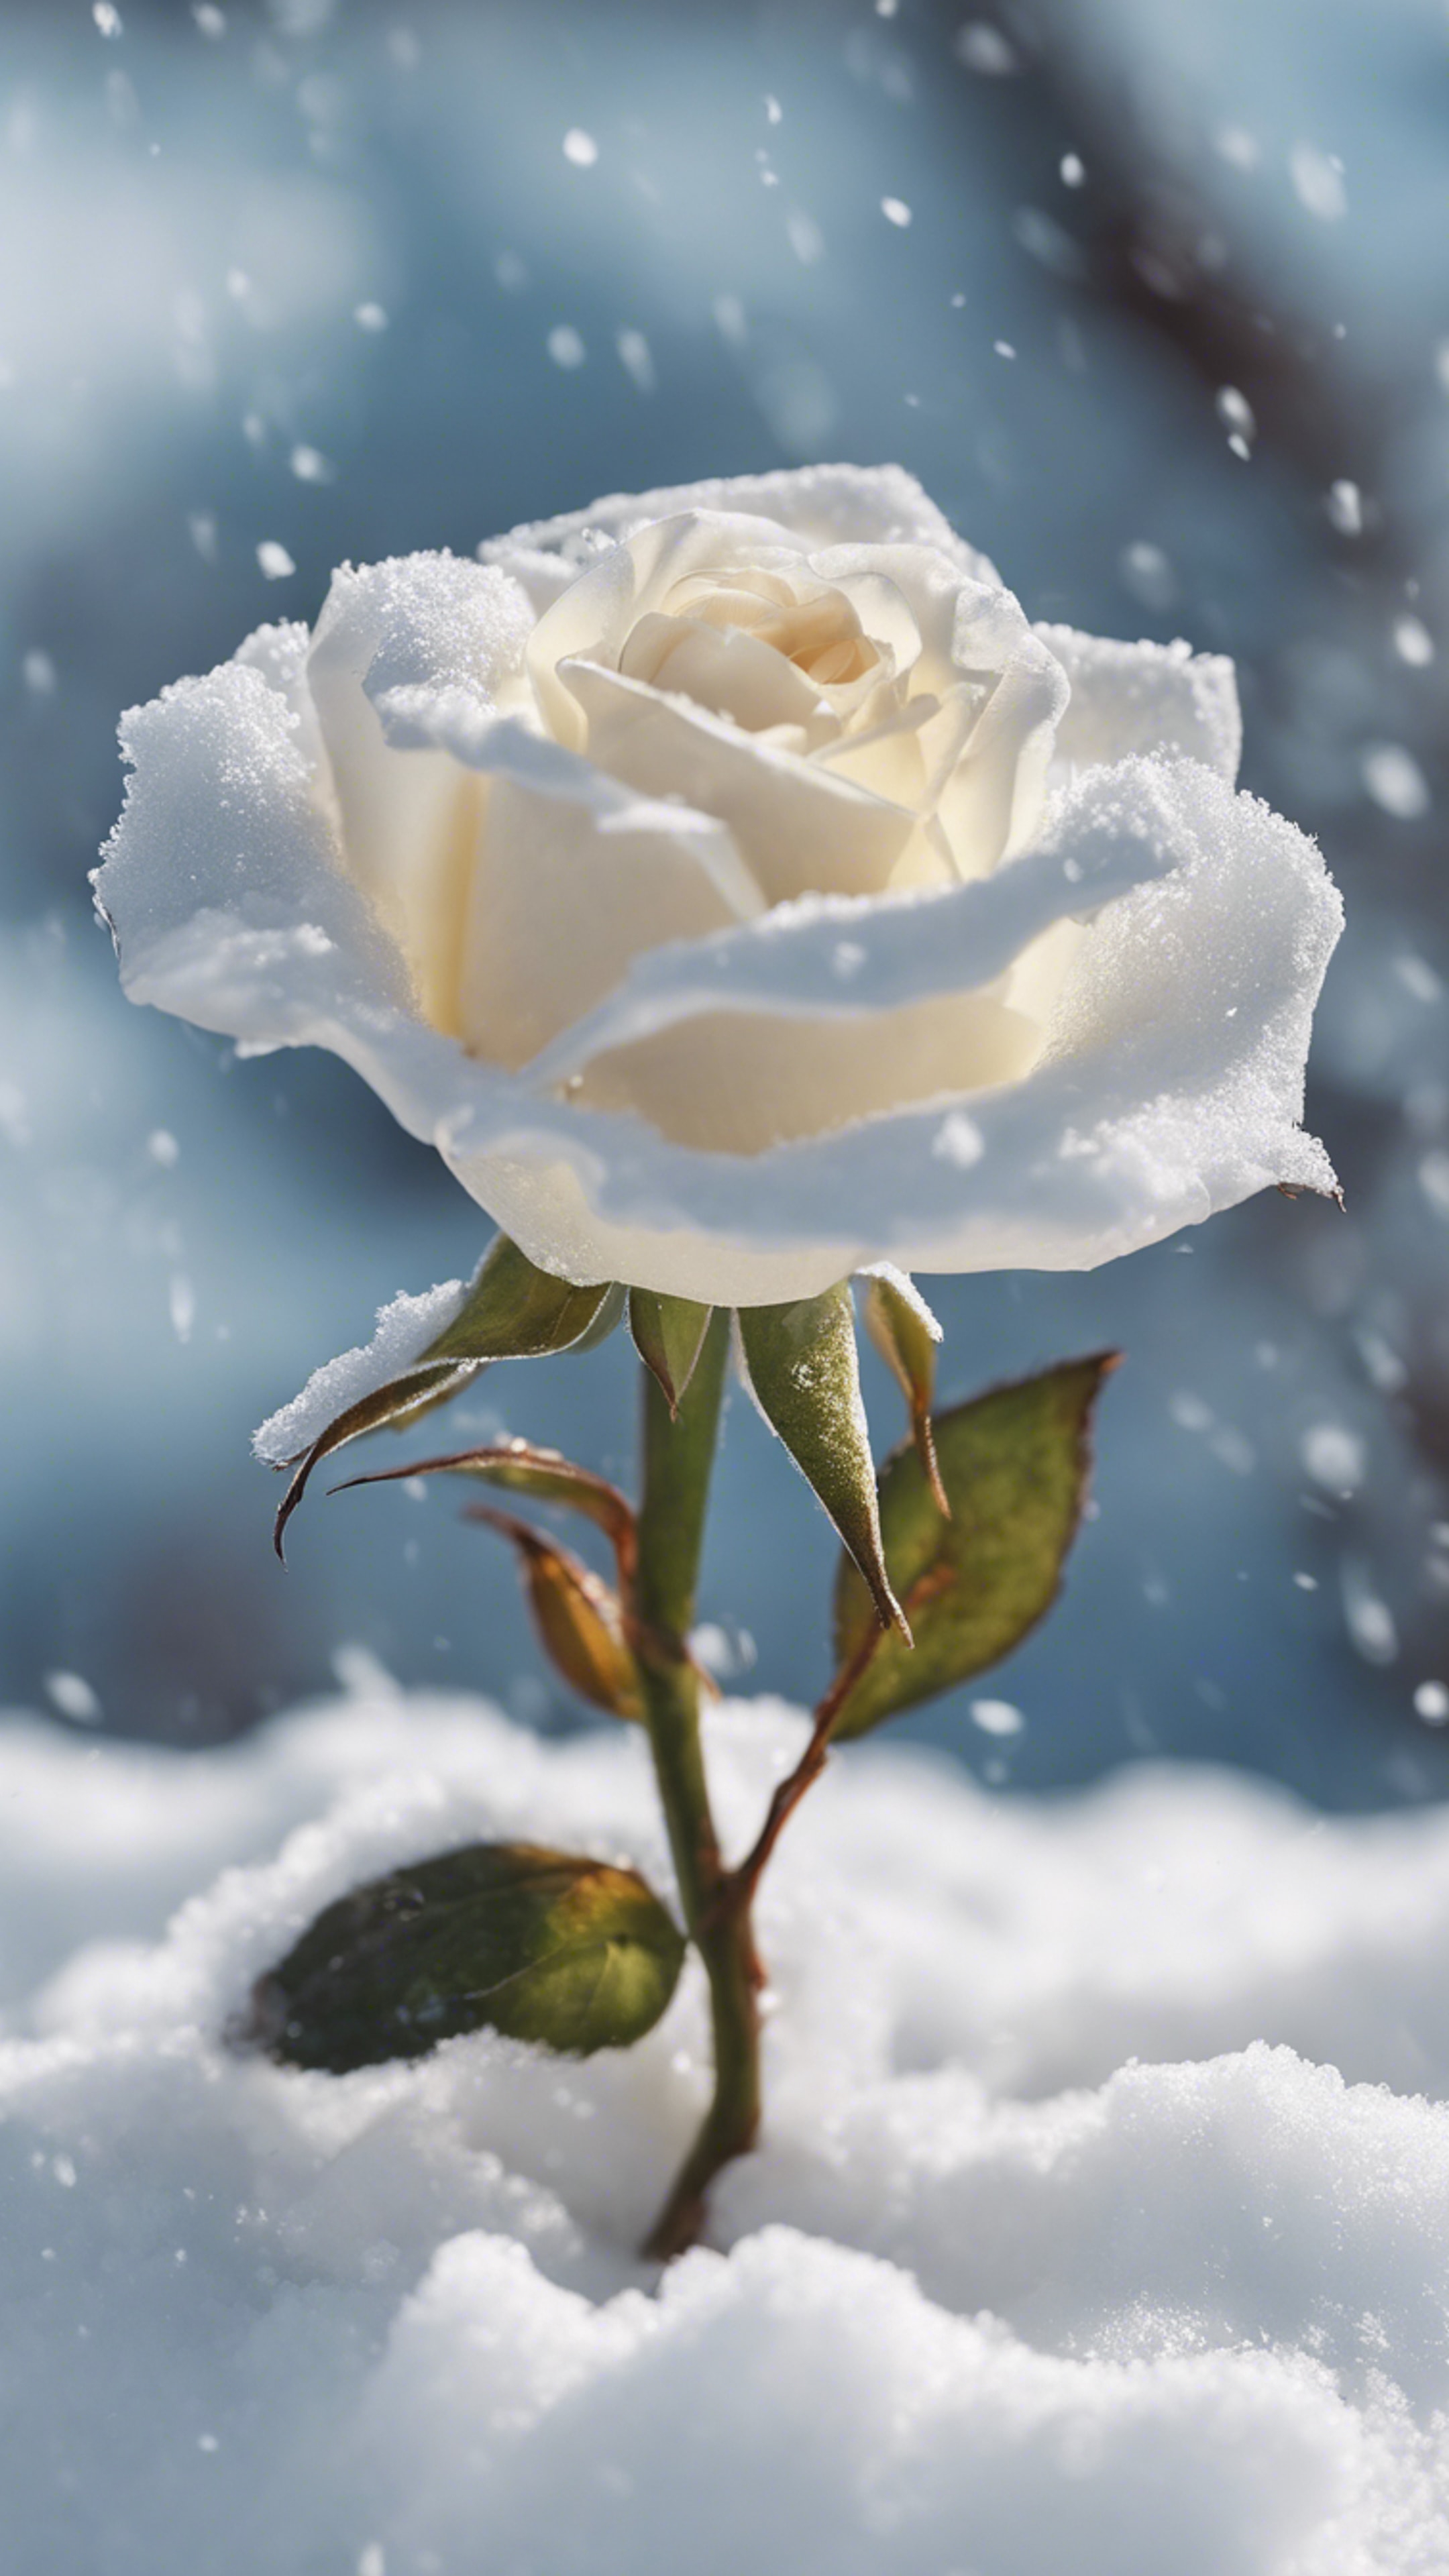 A newly opened white rose sticking out of a snowdrift in early spring. 墙纸[6918b7c4f5774047824c]